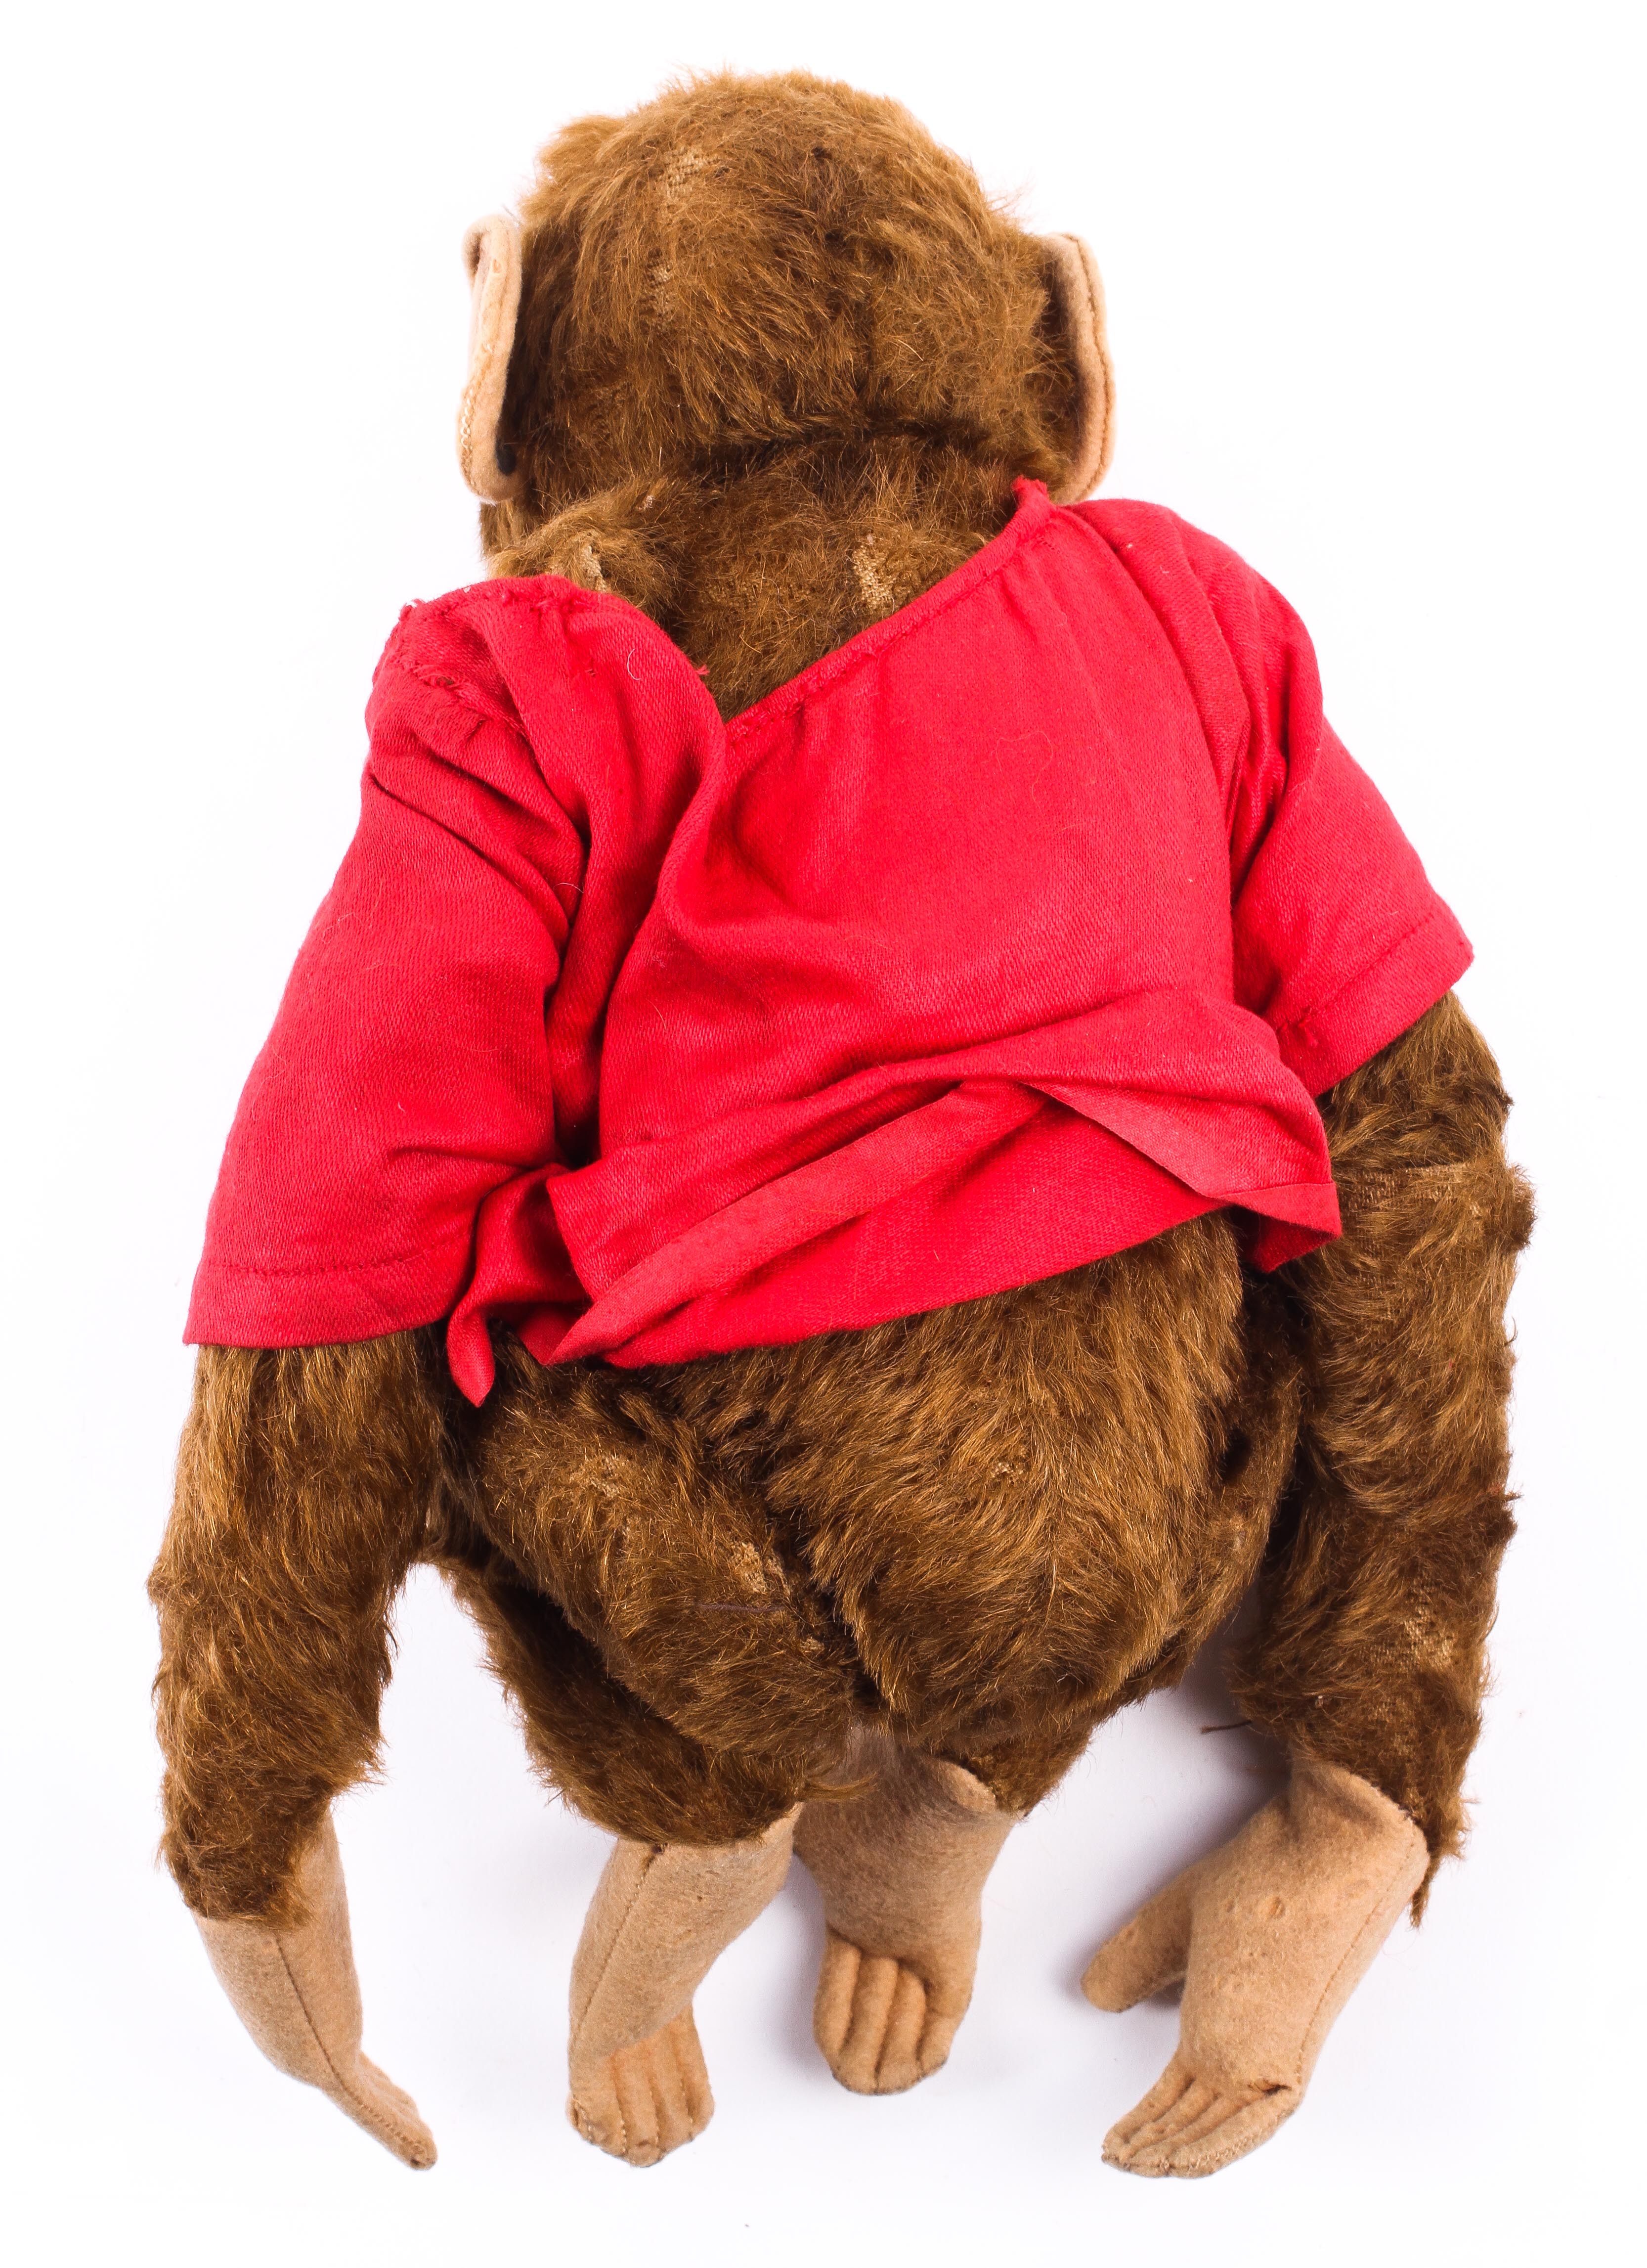 A Steiff monkey wearing a red jacket, early/mid-20th century. - Image 2 of 2